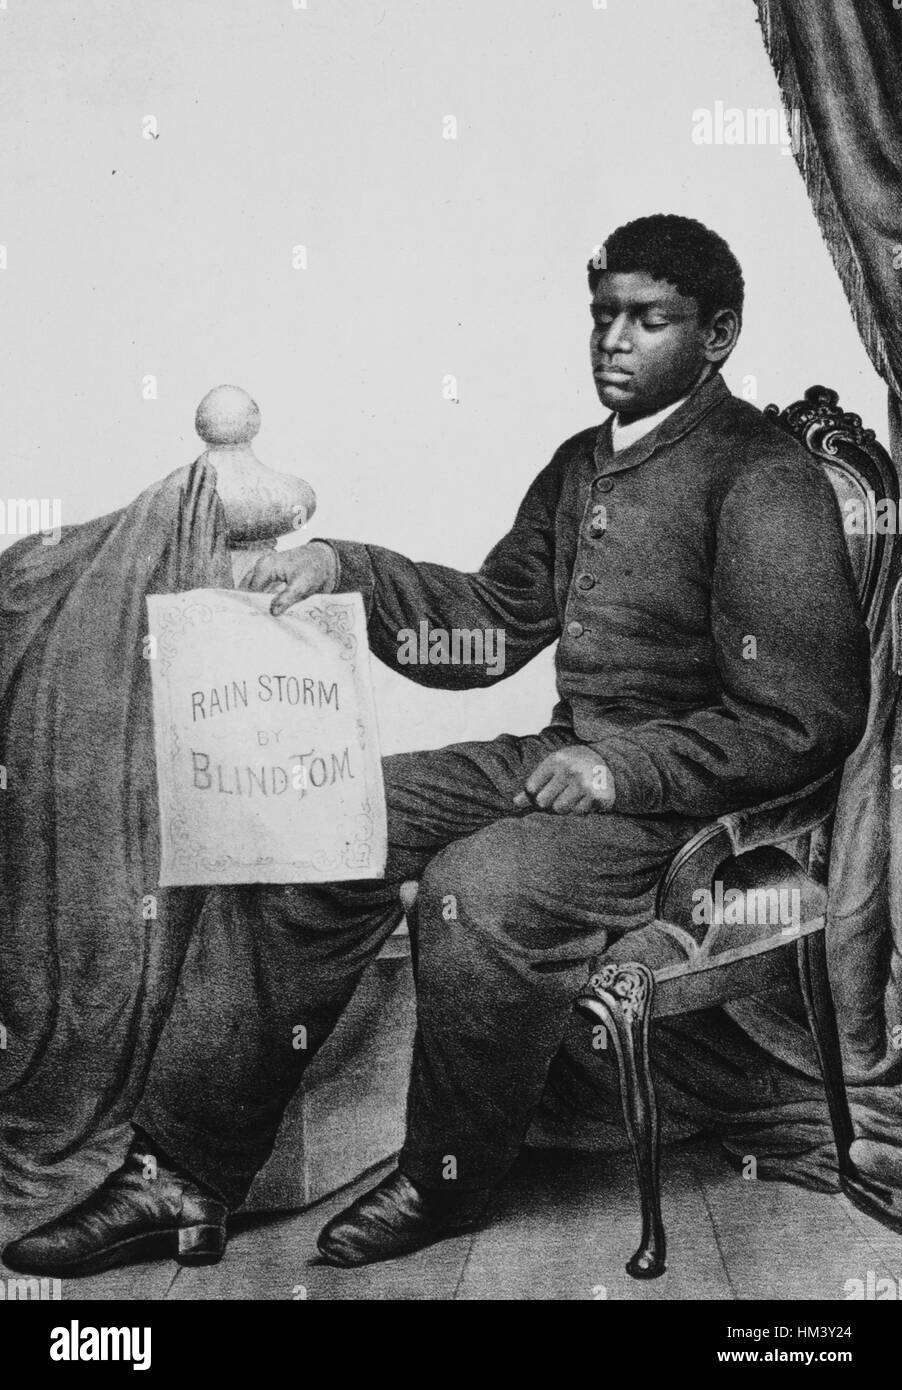 Thomas Wiggins, the musical prodigy known as Blind Tom, sitting in a chair and holding a sign that reads Rain Storm by Blind Tom, 1879. From the New York Public Library. Stock Photo